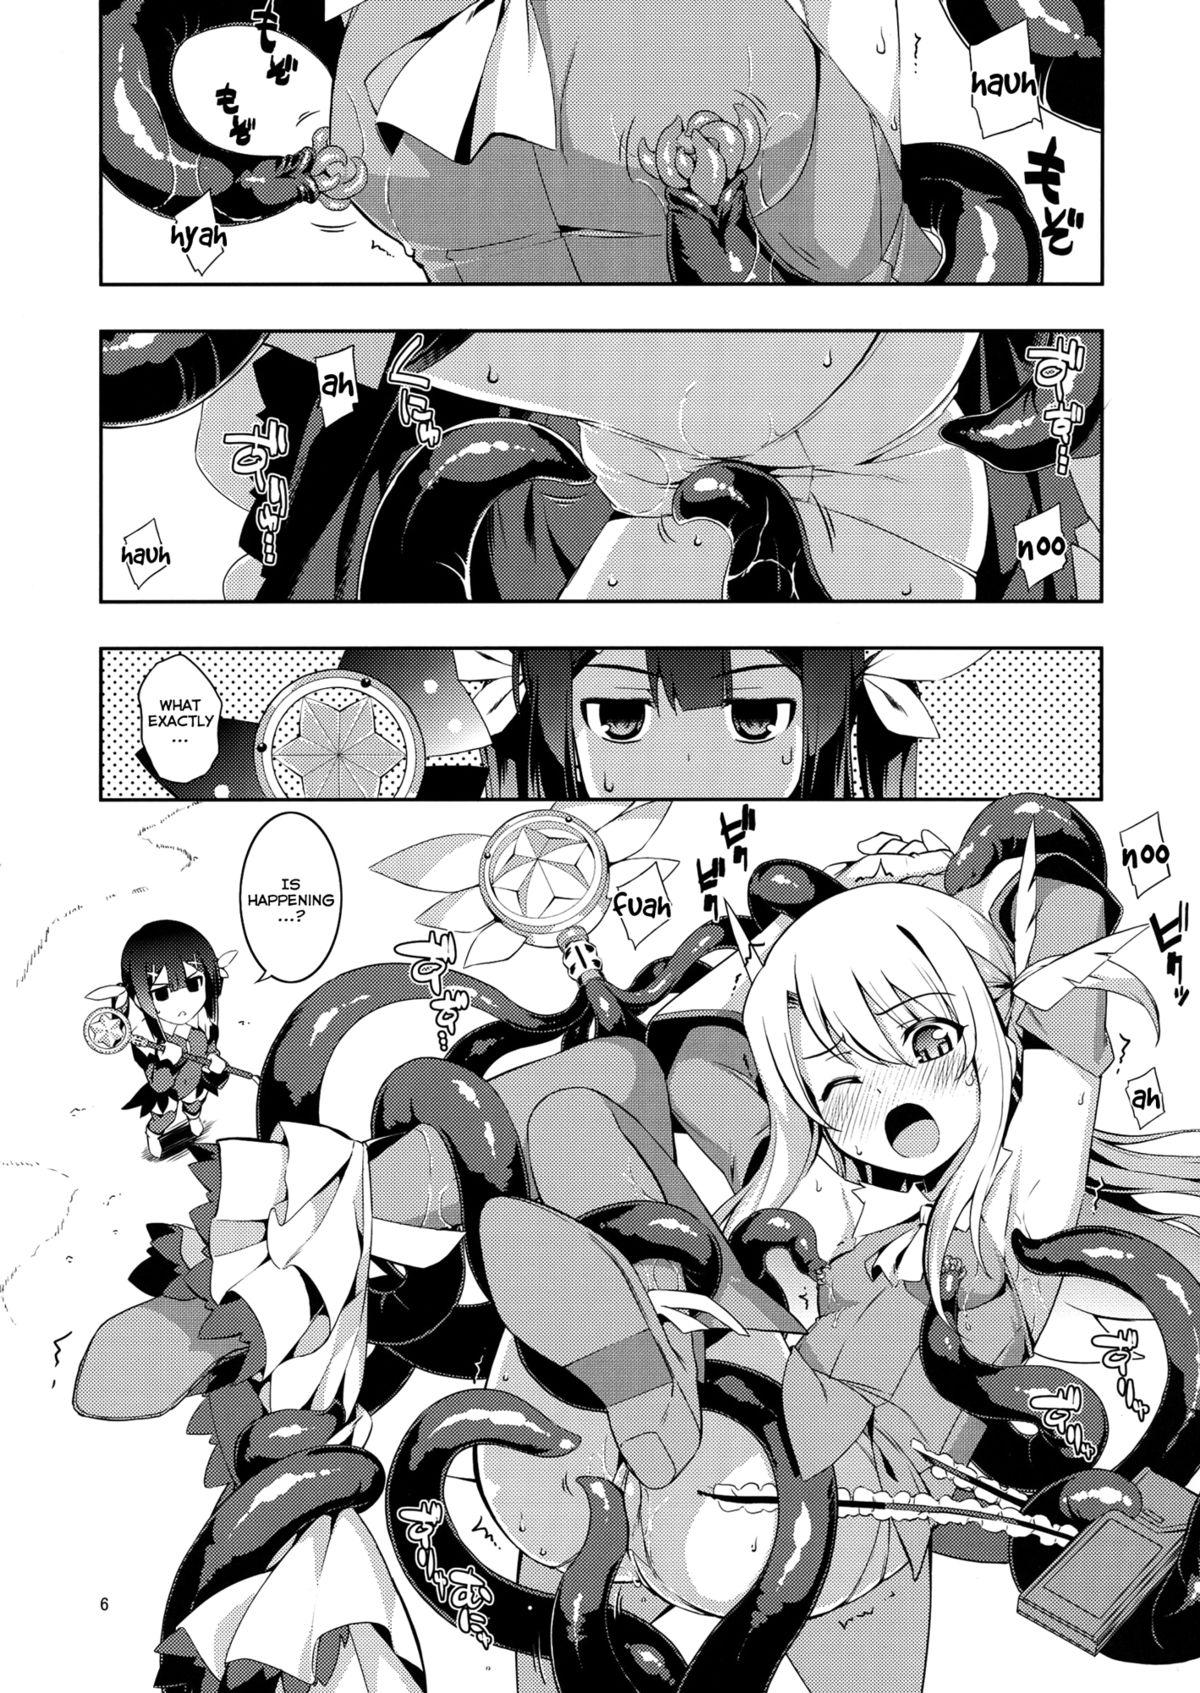 Blowing RE 18 - Fate kaleid liner prisma illya Rough Porn - Page 6